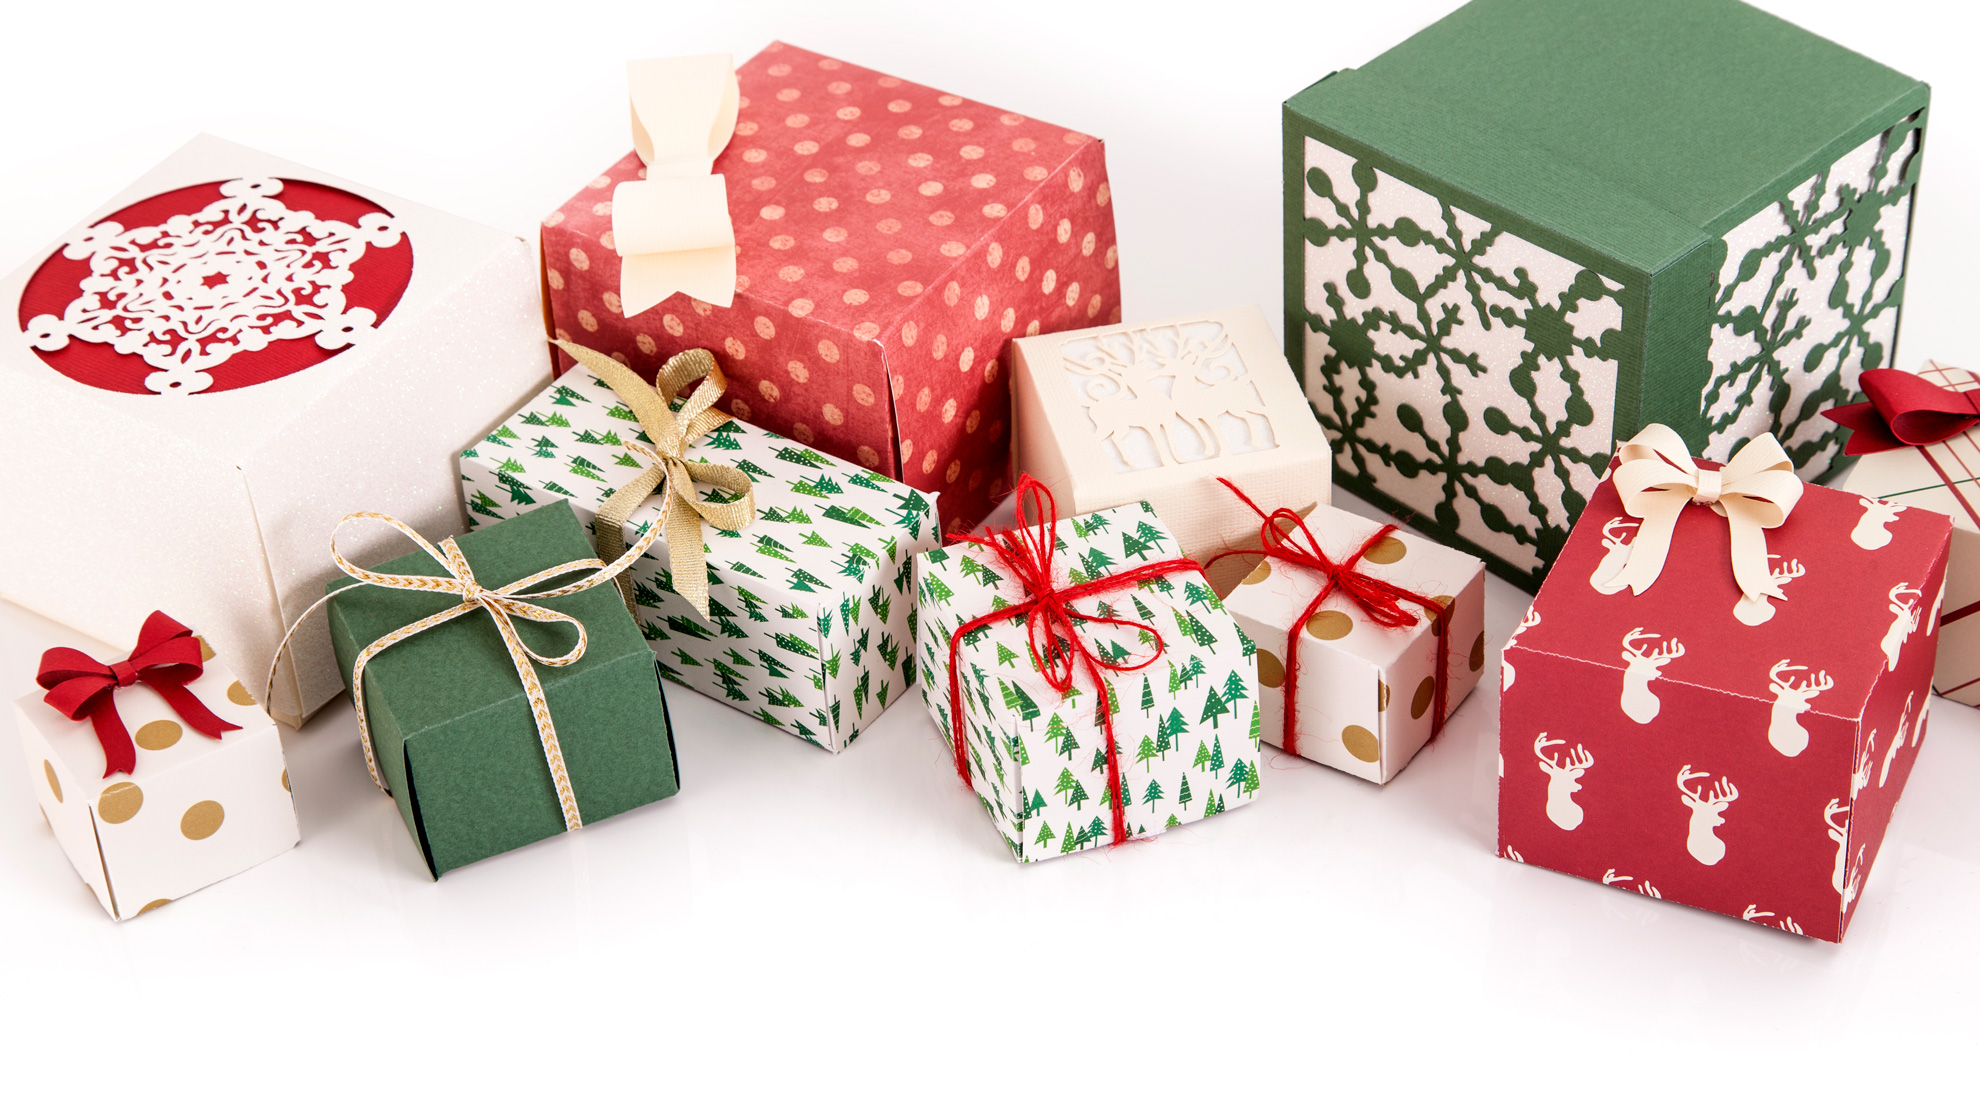 Must have materials for holiday gift giving